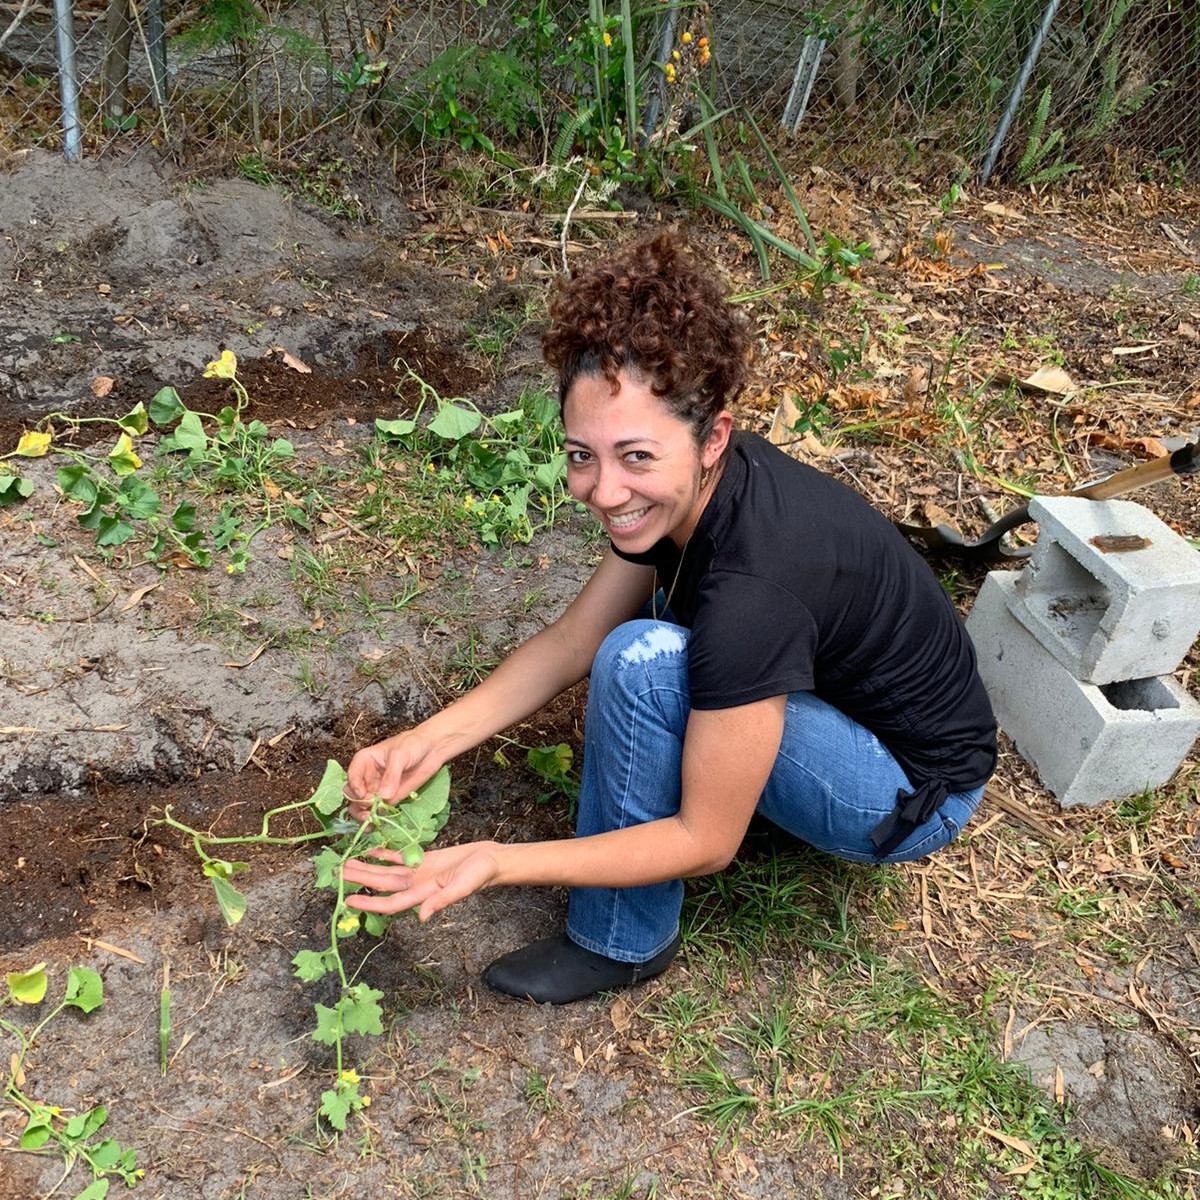 Two of our staff members from Apopka joined our Pierson office to help with gardening! A community member from Pierson, who has always been supportive of our community garden, brought in watermelons and cantaloupes from her garden to be planted in the community garden.